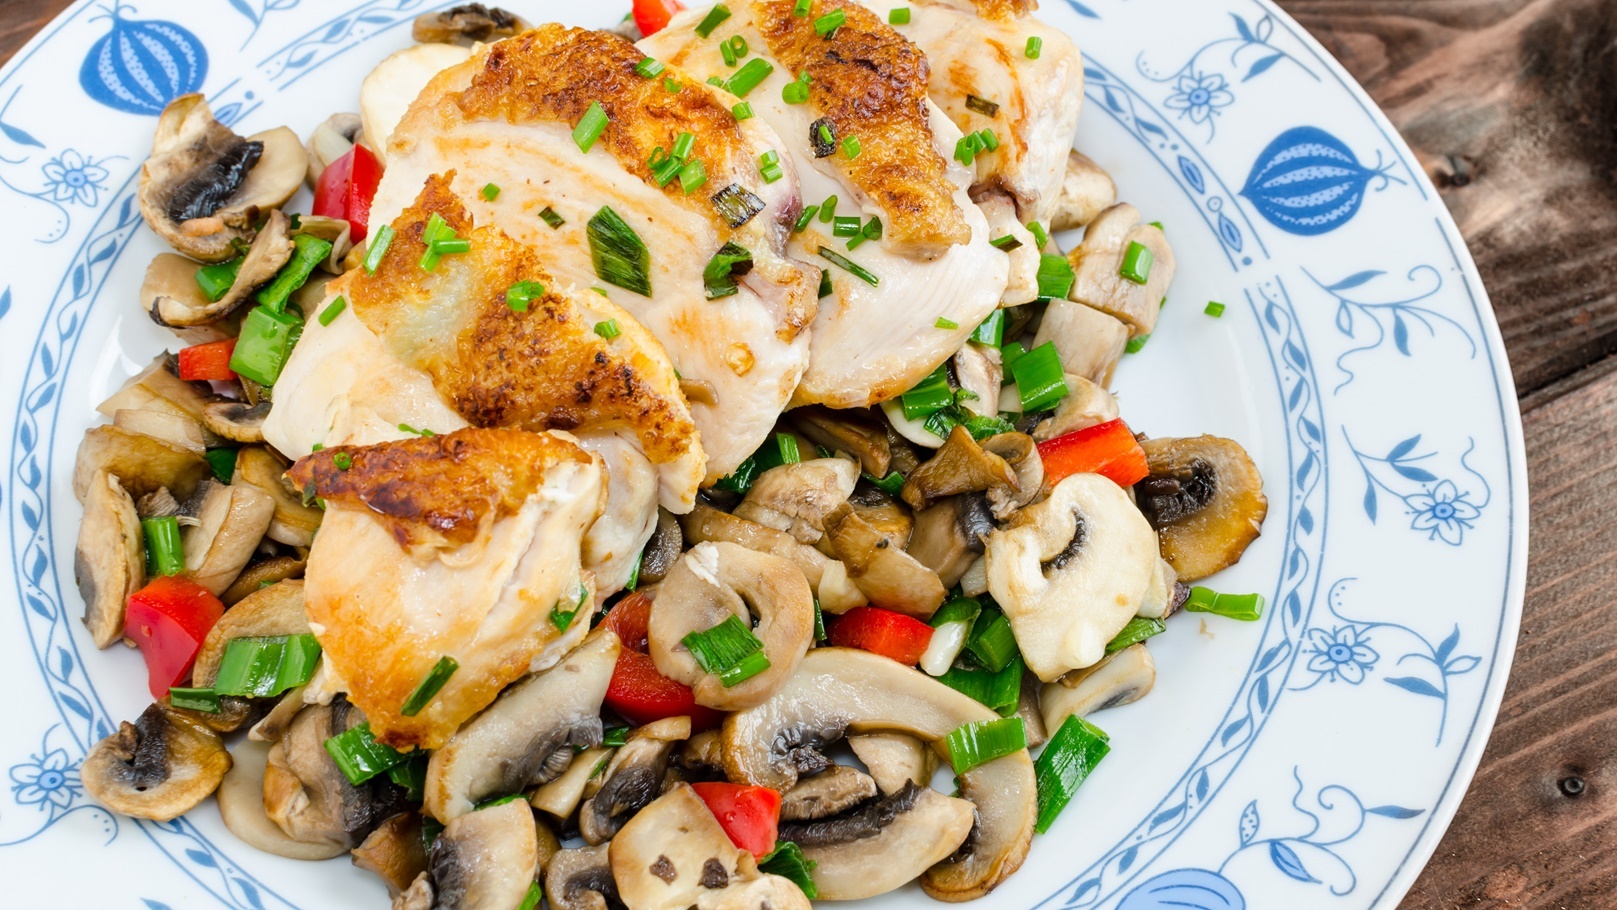 chicken-breast-with-mushrooms-and-spring-onions-2022-02-06-07-00-55-utc